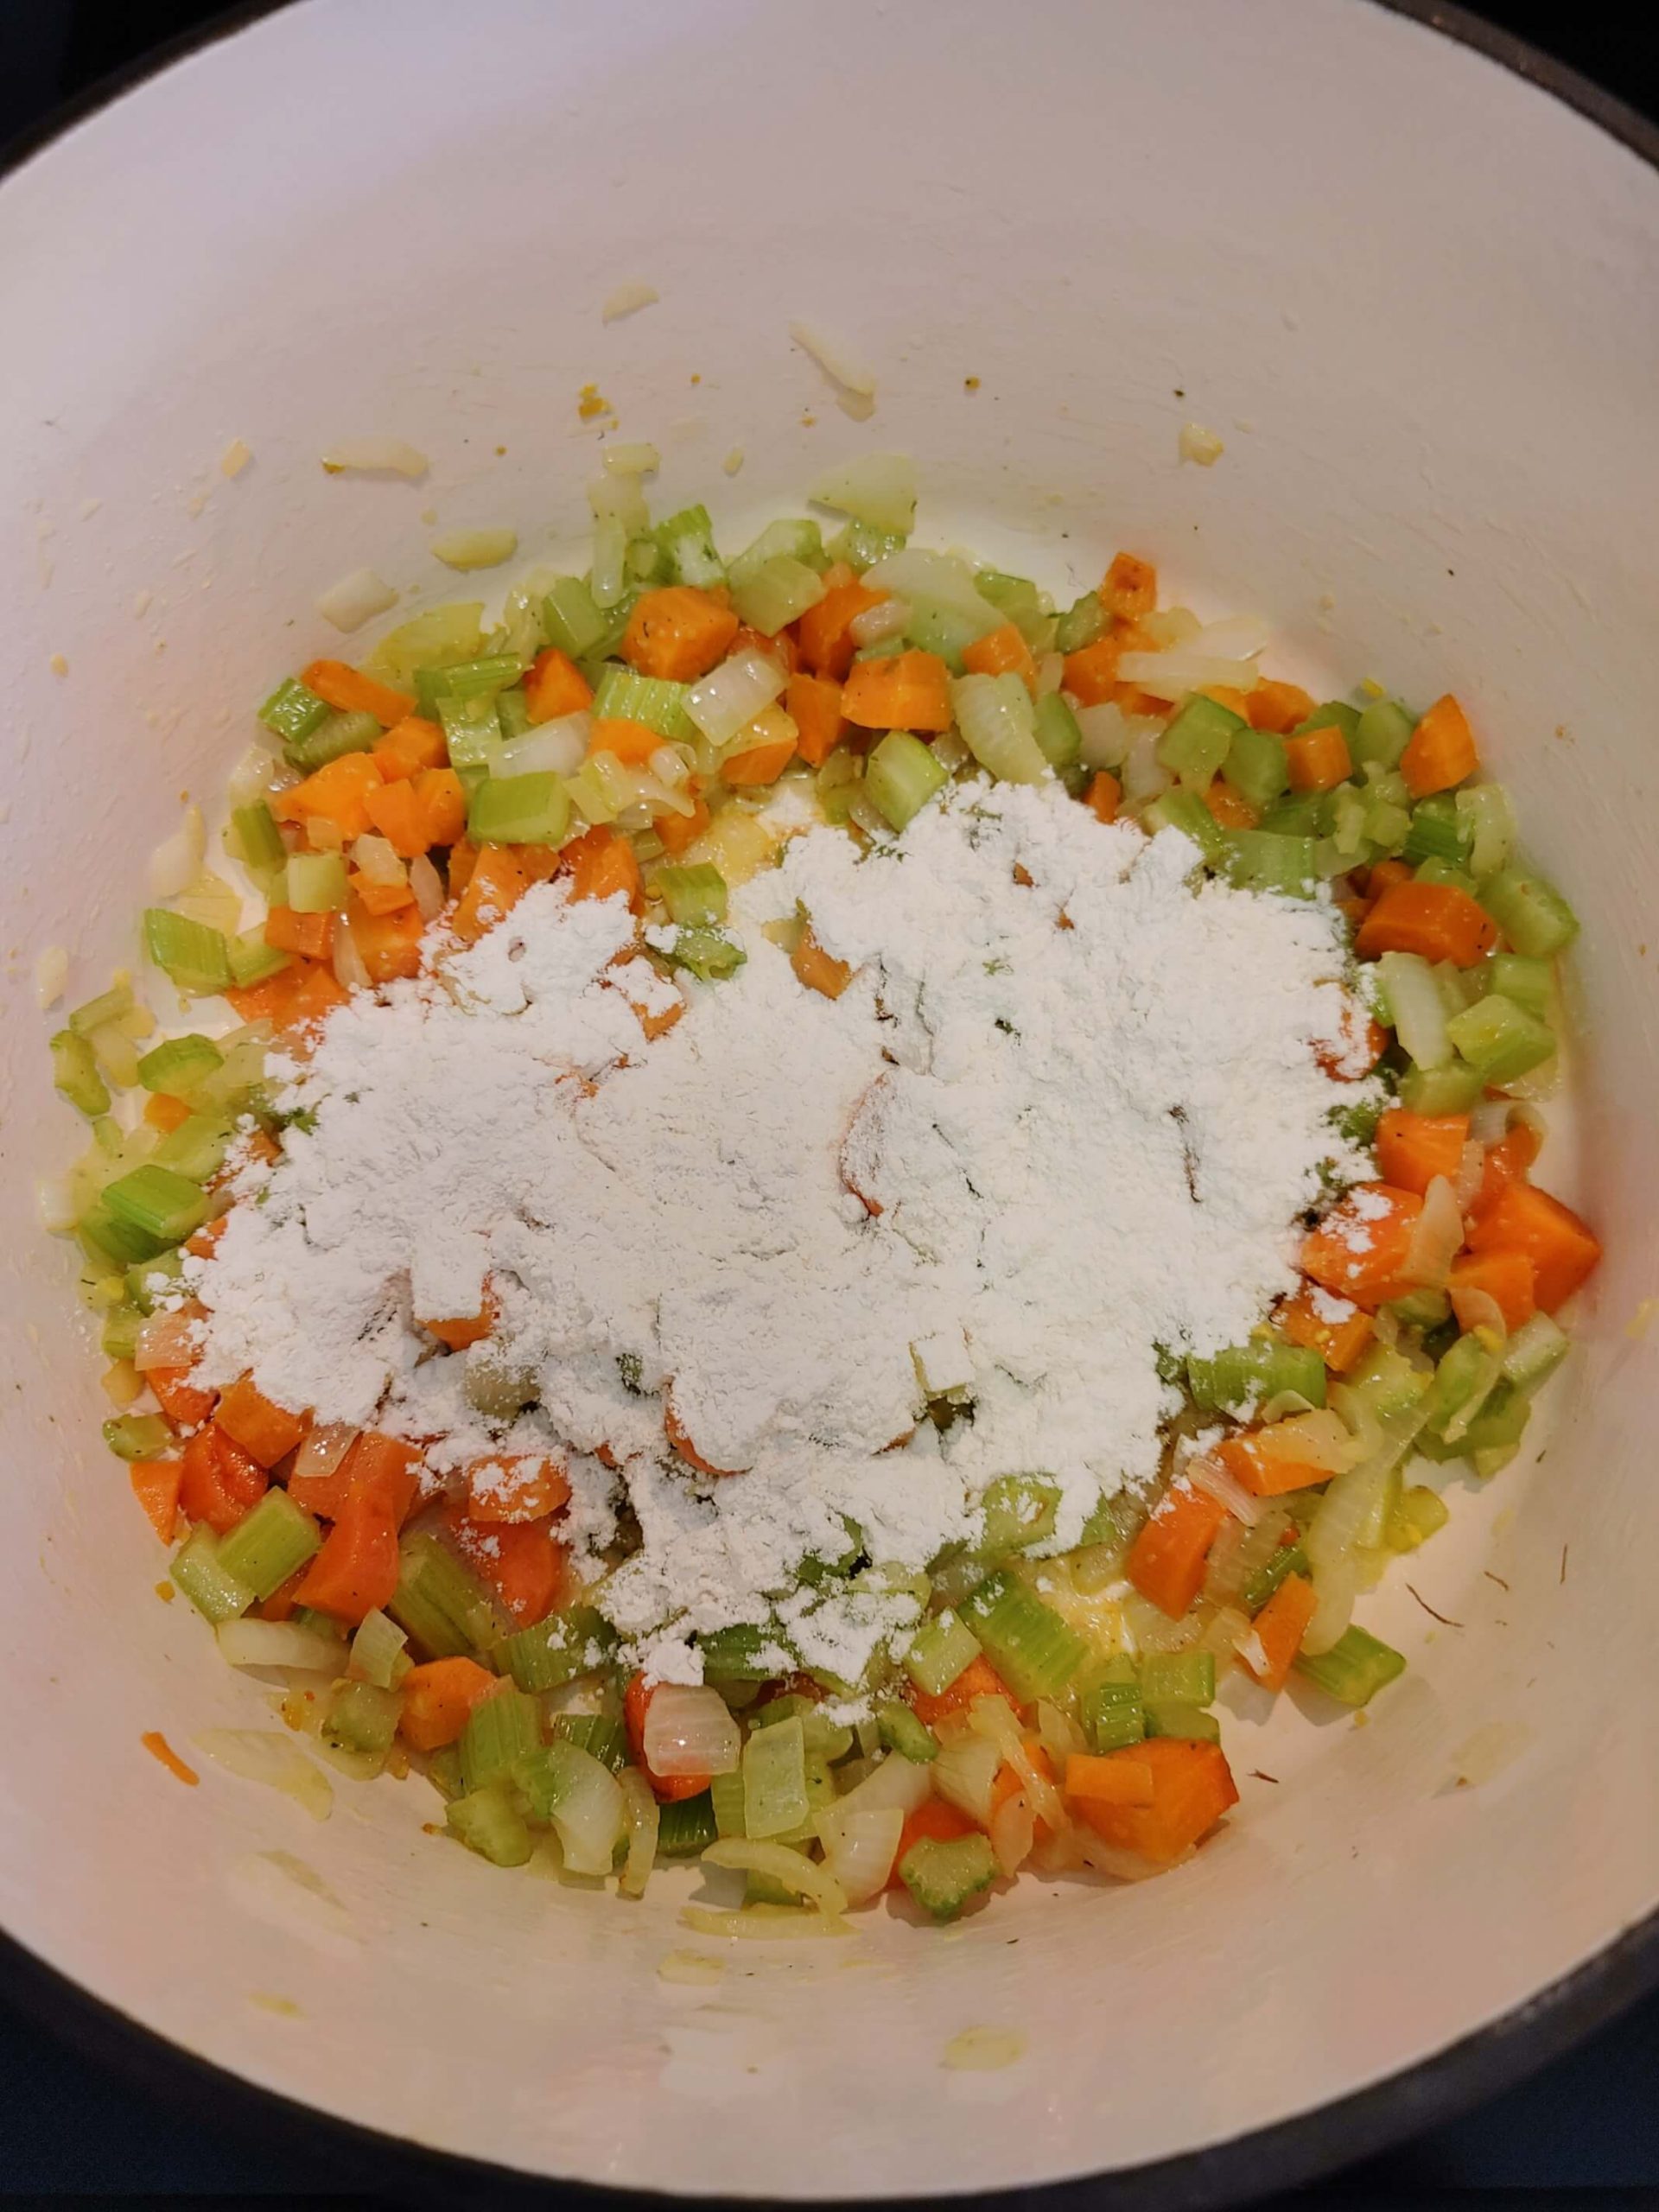 ADD FLOUR TO THE ONION, CARROTS, AND CELERY